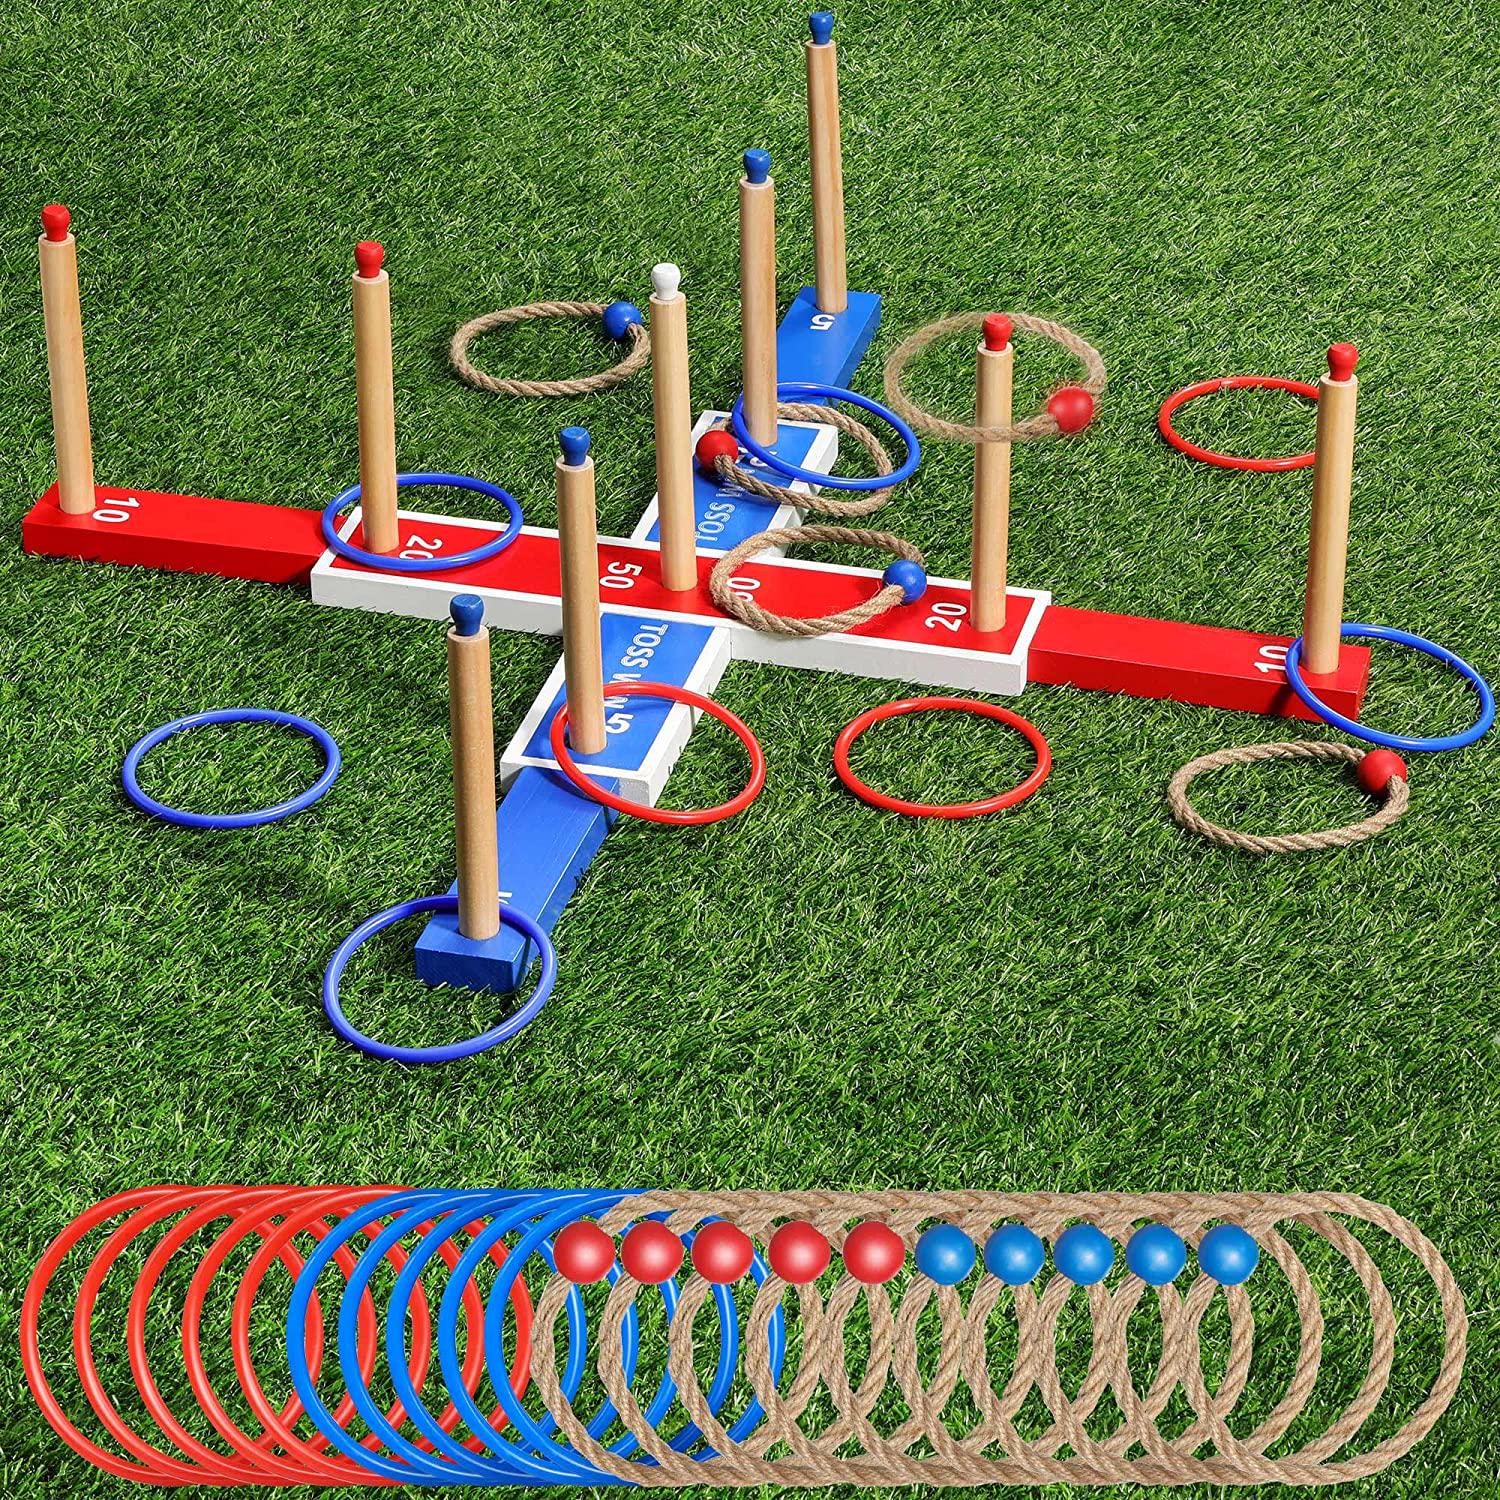 Meonum, Meonum Wooden Ring Tossing Game for Kids, 30 Inch Large Rings Toss Set with 20 Toss Rings, Kid and Adult Game for Backyard Lawn Yard Wedding BBQ Camping